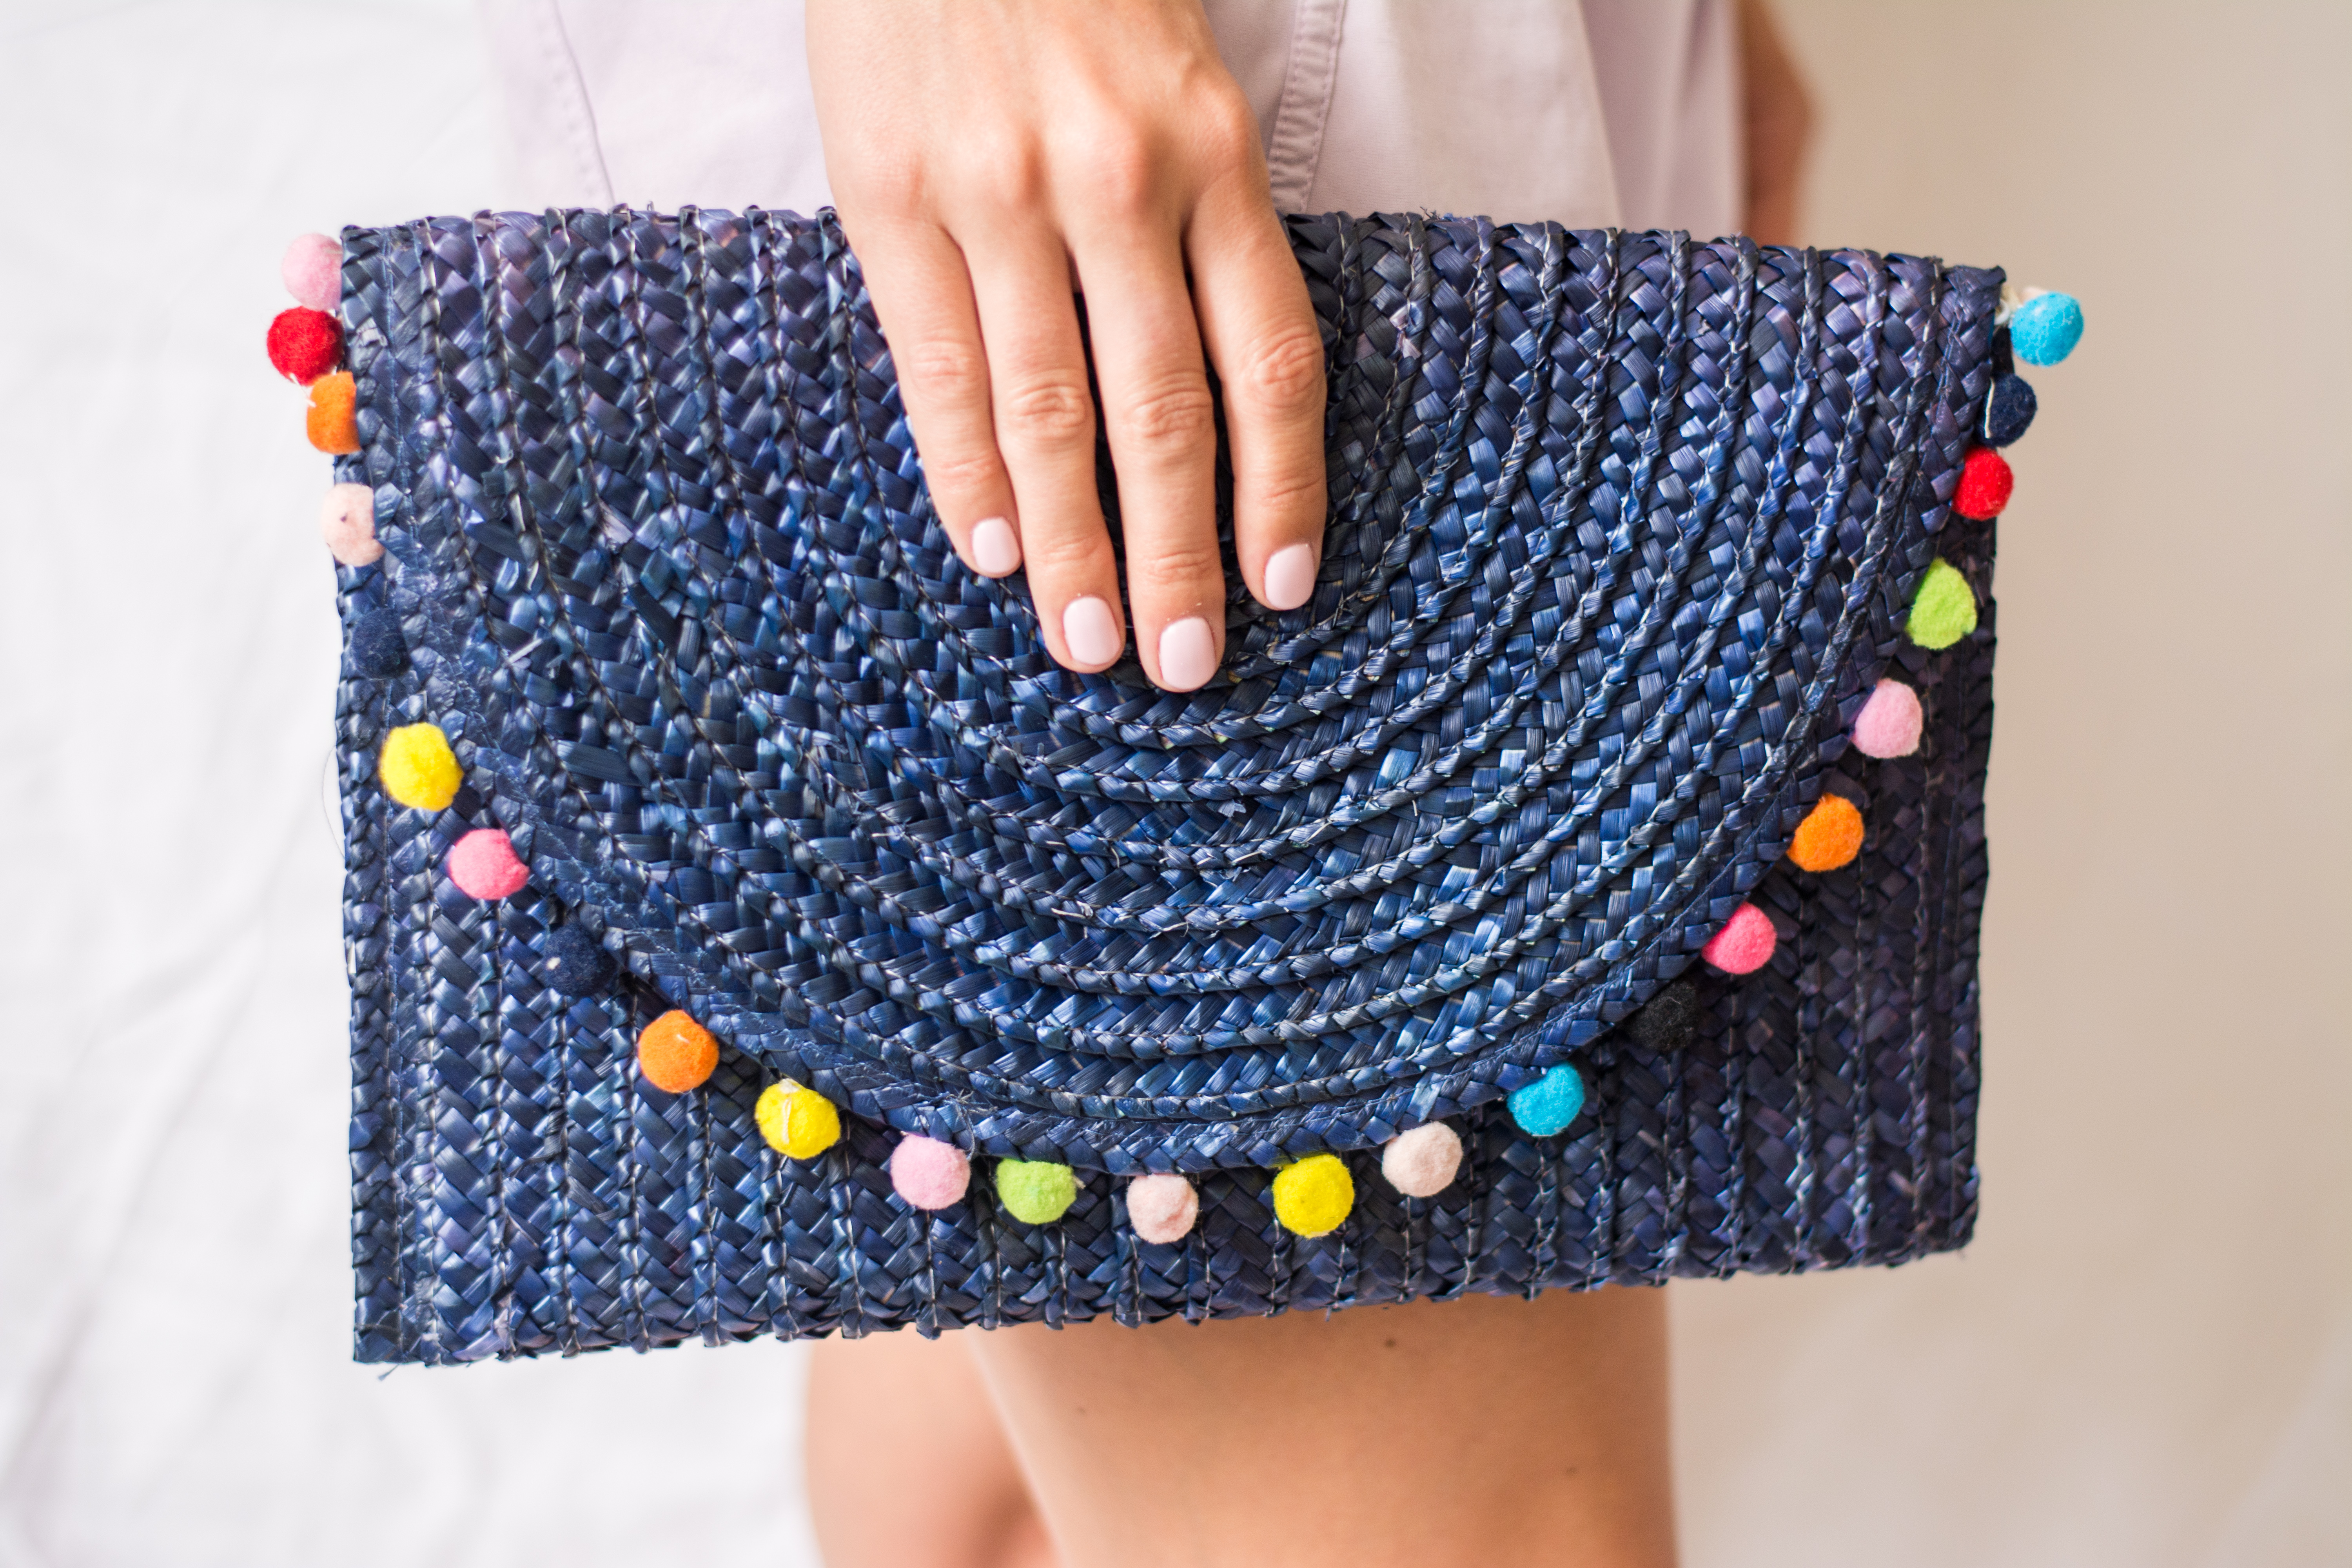 Bohemian Summer Clutch Held By Manicured Hand